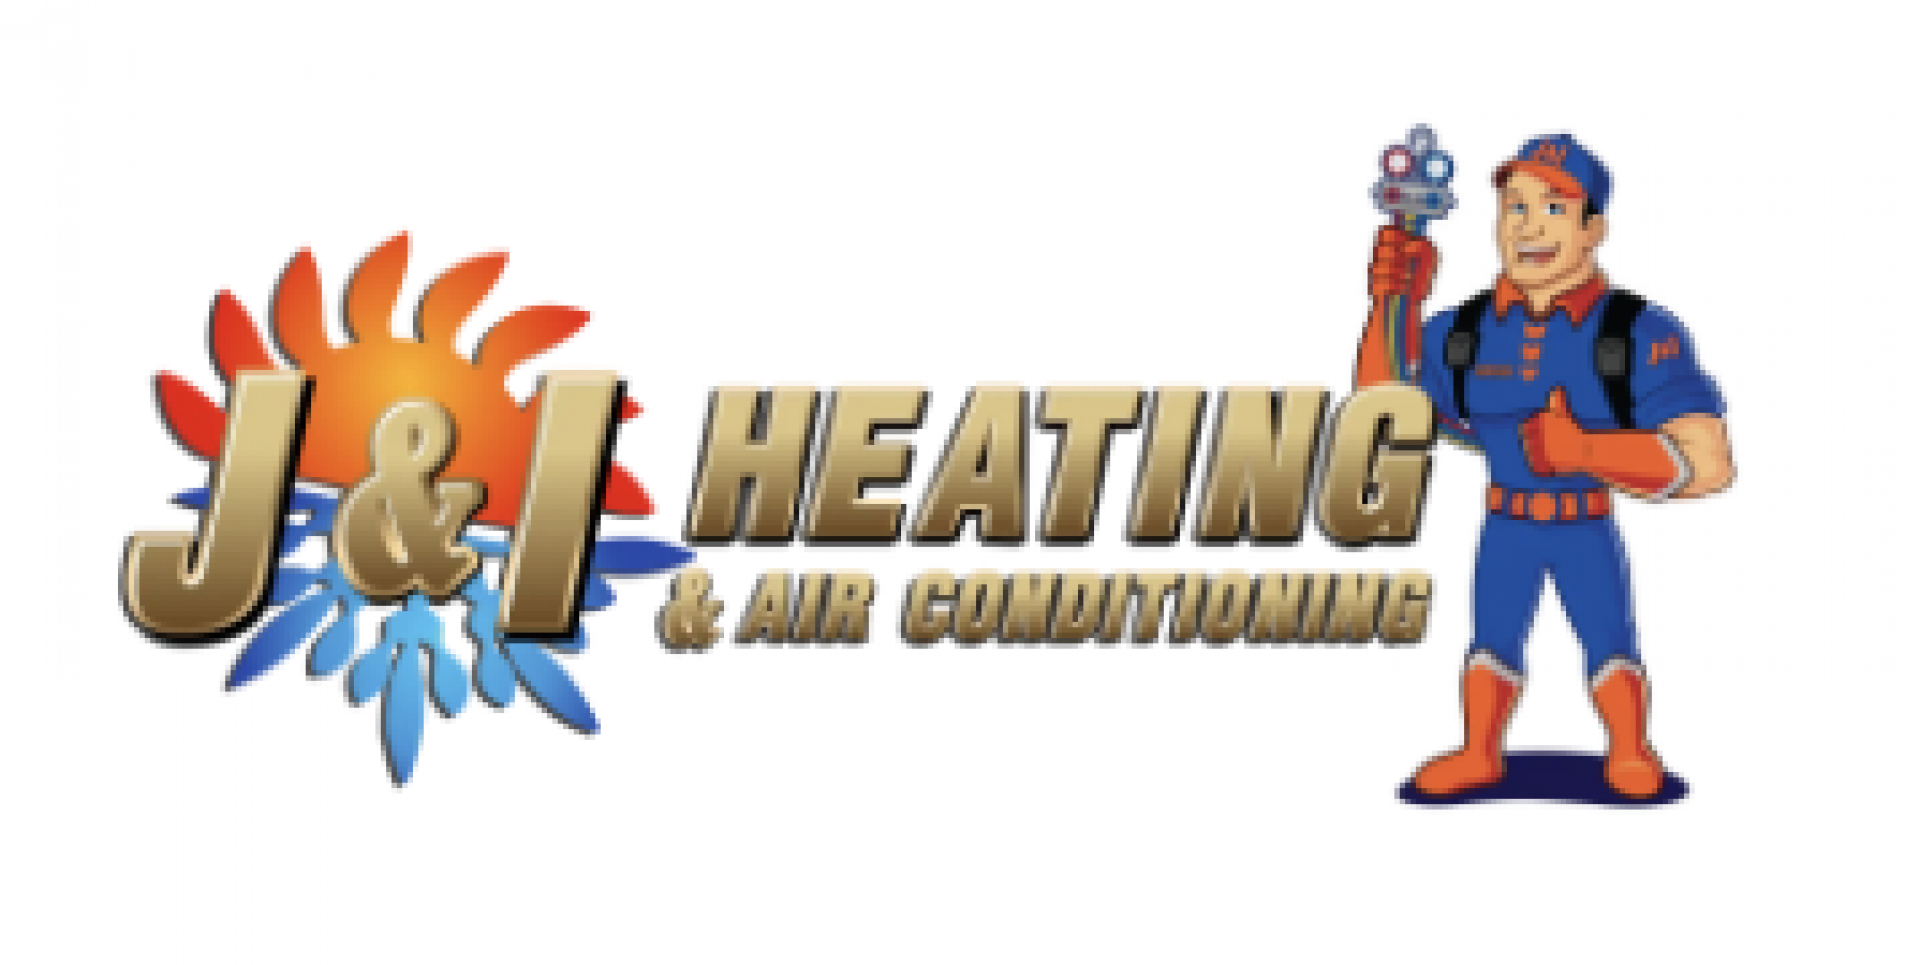 J&I Heating and Air Conditioning logo